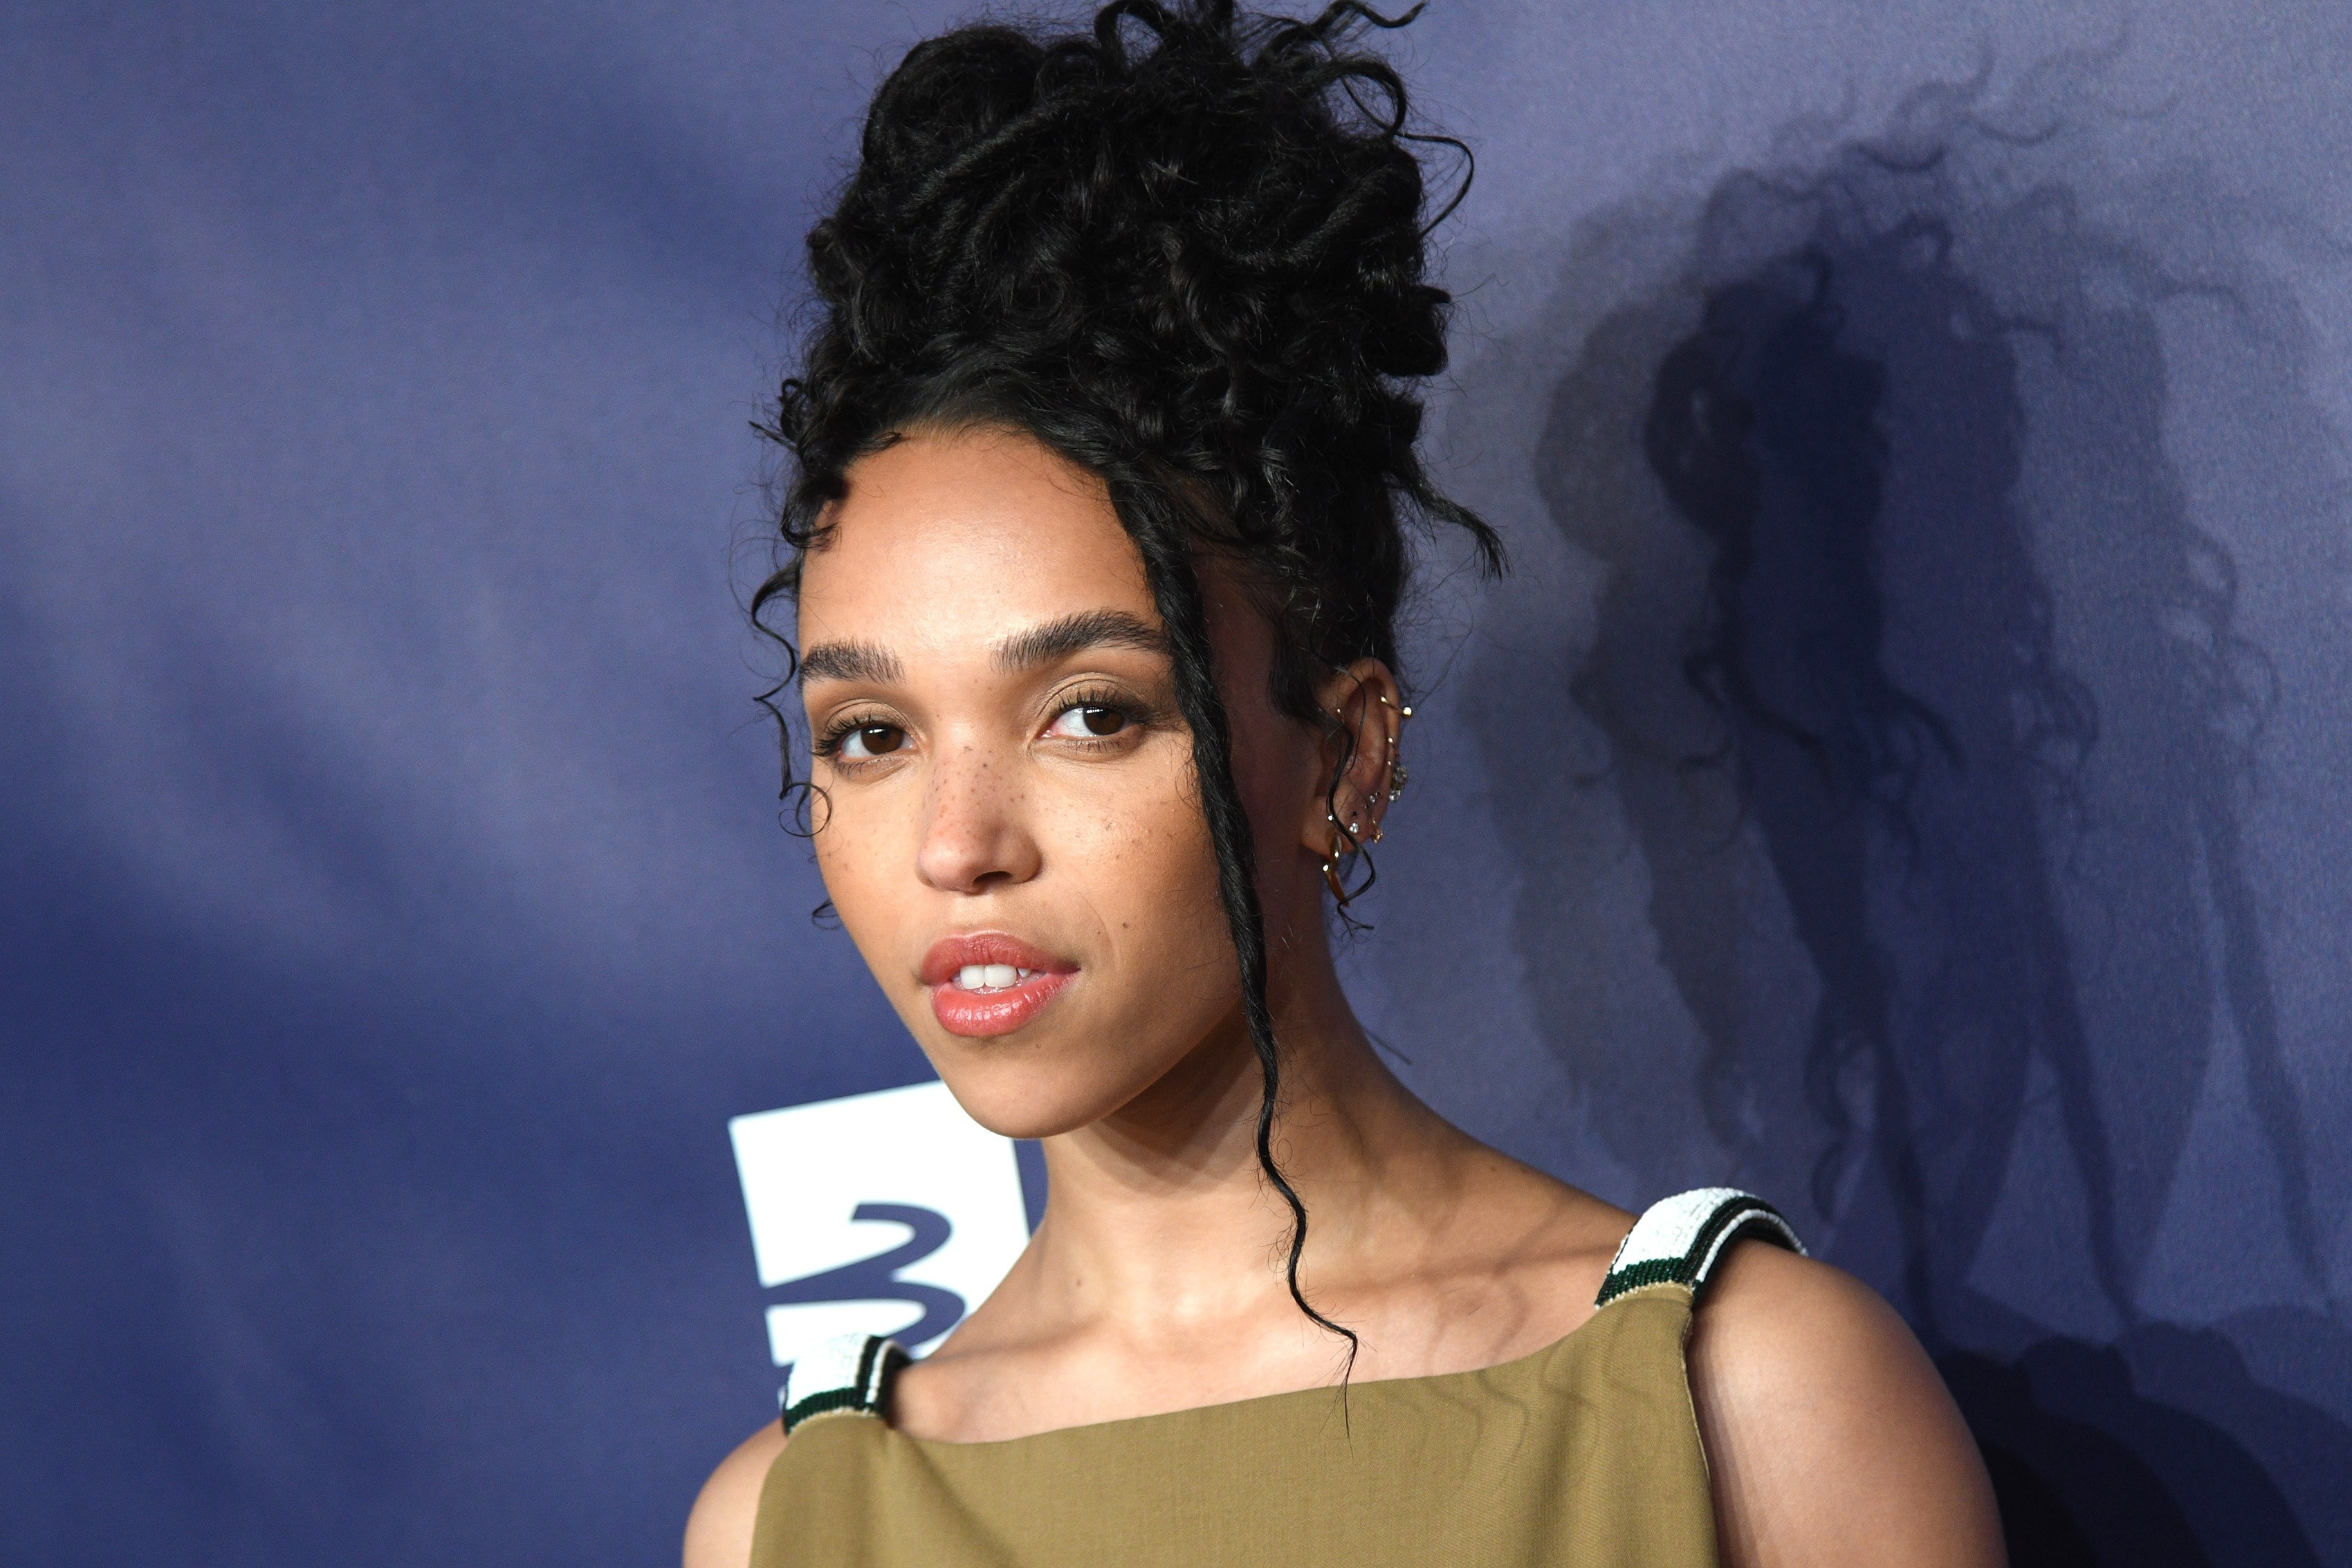 FKA twigs begs lover to ‘take care of her heart’ on new song after Shia LaBeouf relationship